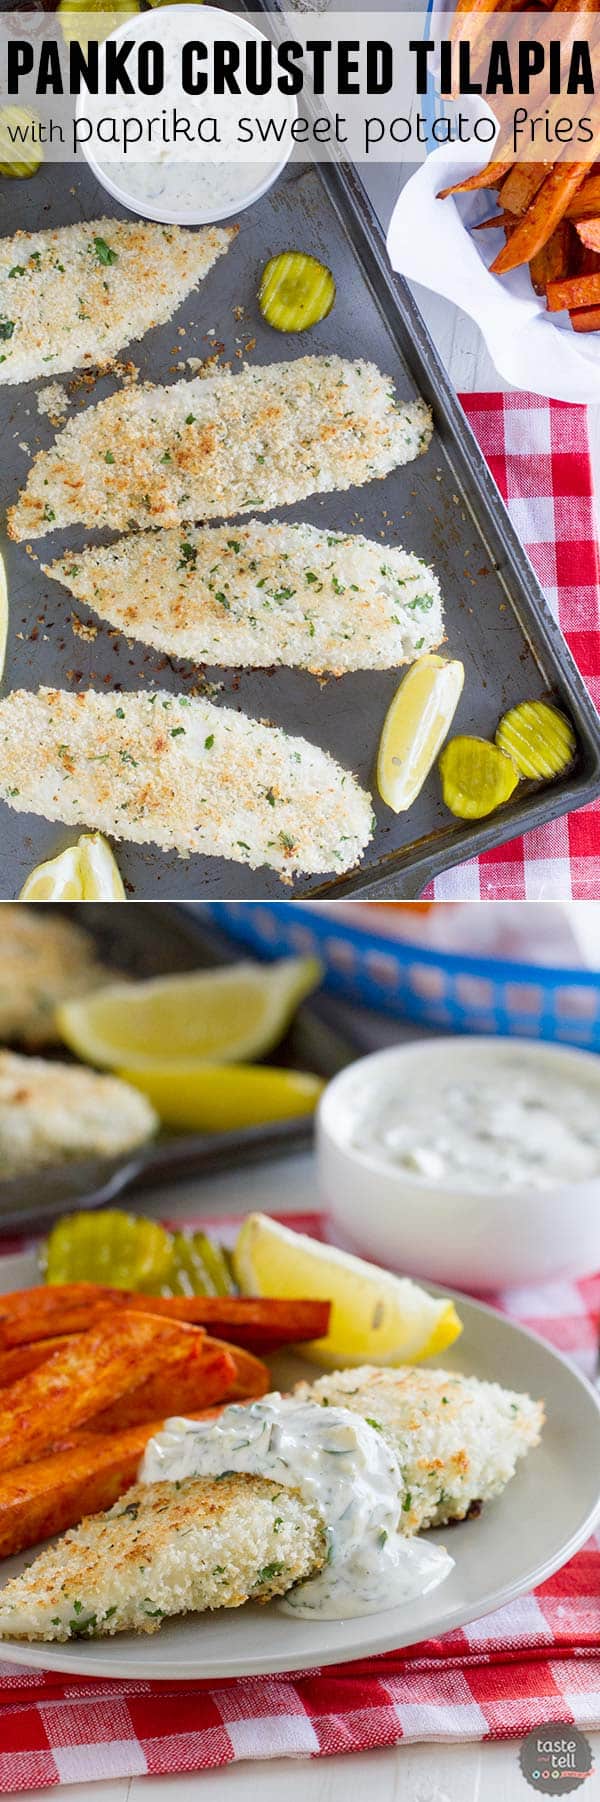 Simple, healthy and fast, this baked Panko Crusted Tilapia is served with a homemade tartar sauce and flavorful baked sweet potato fries.